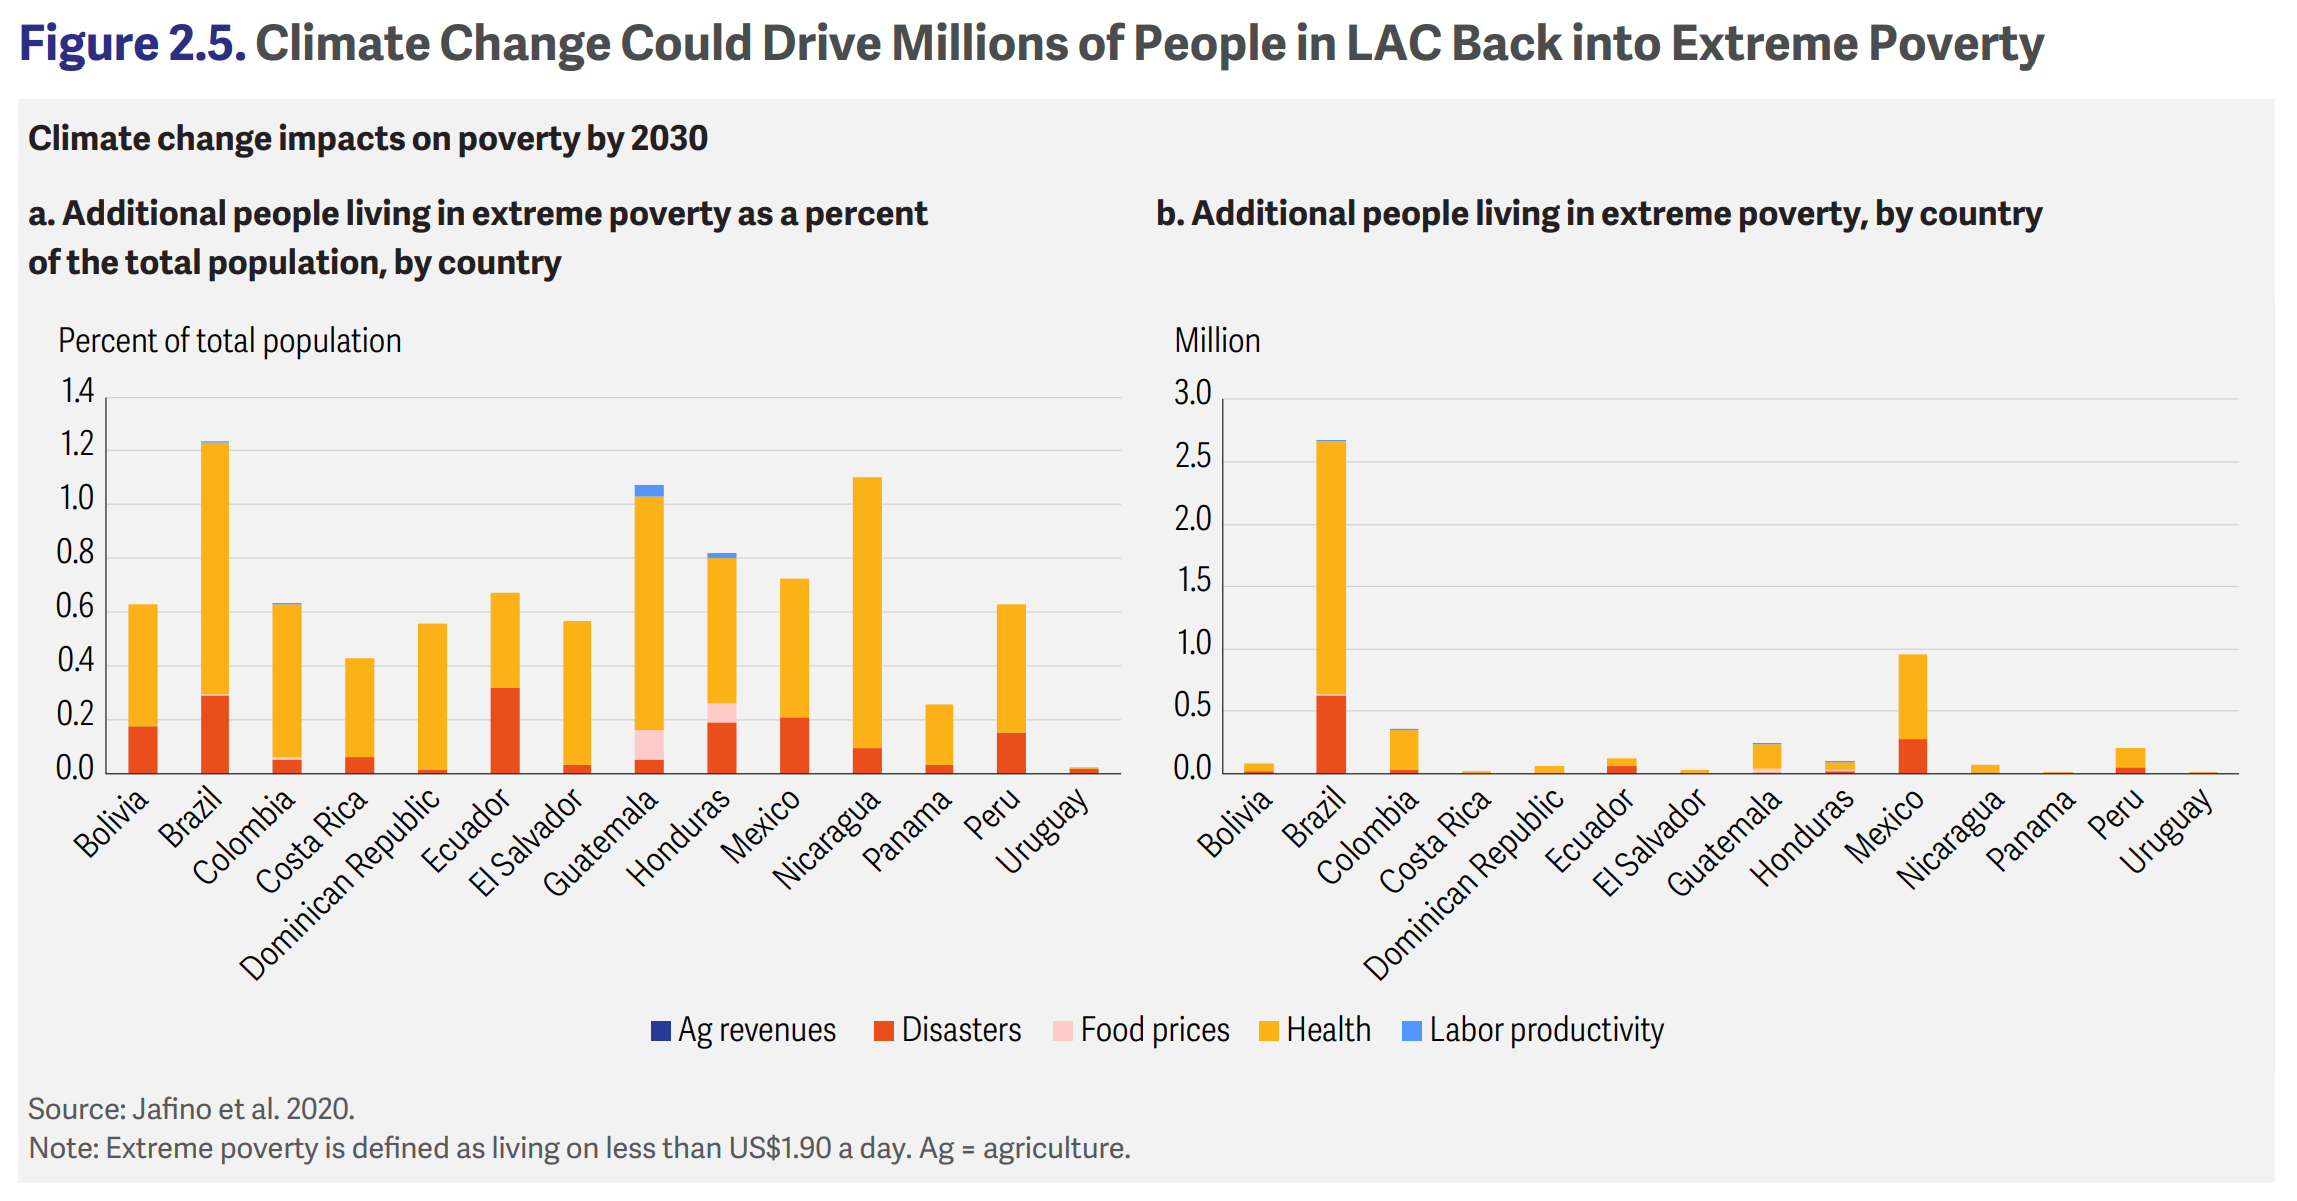 Climate change impacts on poverty by 2030 in Latin America and the Caribbean (LAC). Additional people living in extreme poverty as a percent of the total population, by country (left); additional people living in extreme poverty, by country (right). Climate change could drive millions of people in LAC back into extreme poverty. Graphic: World Bank